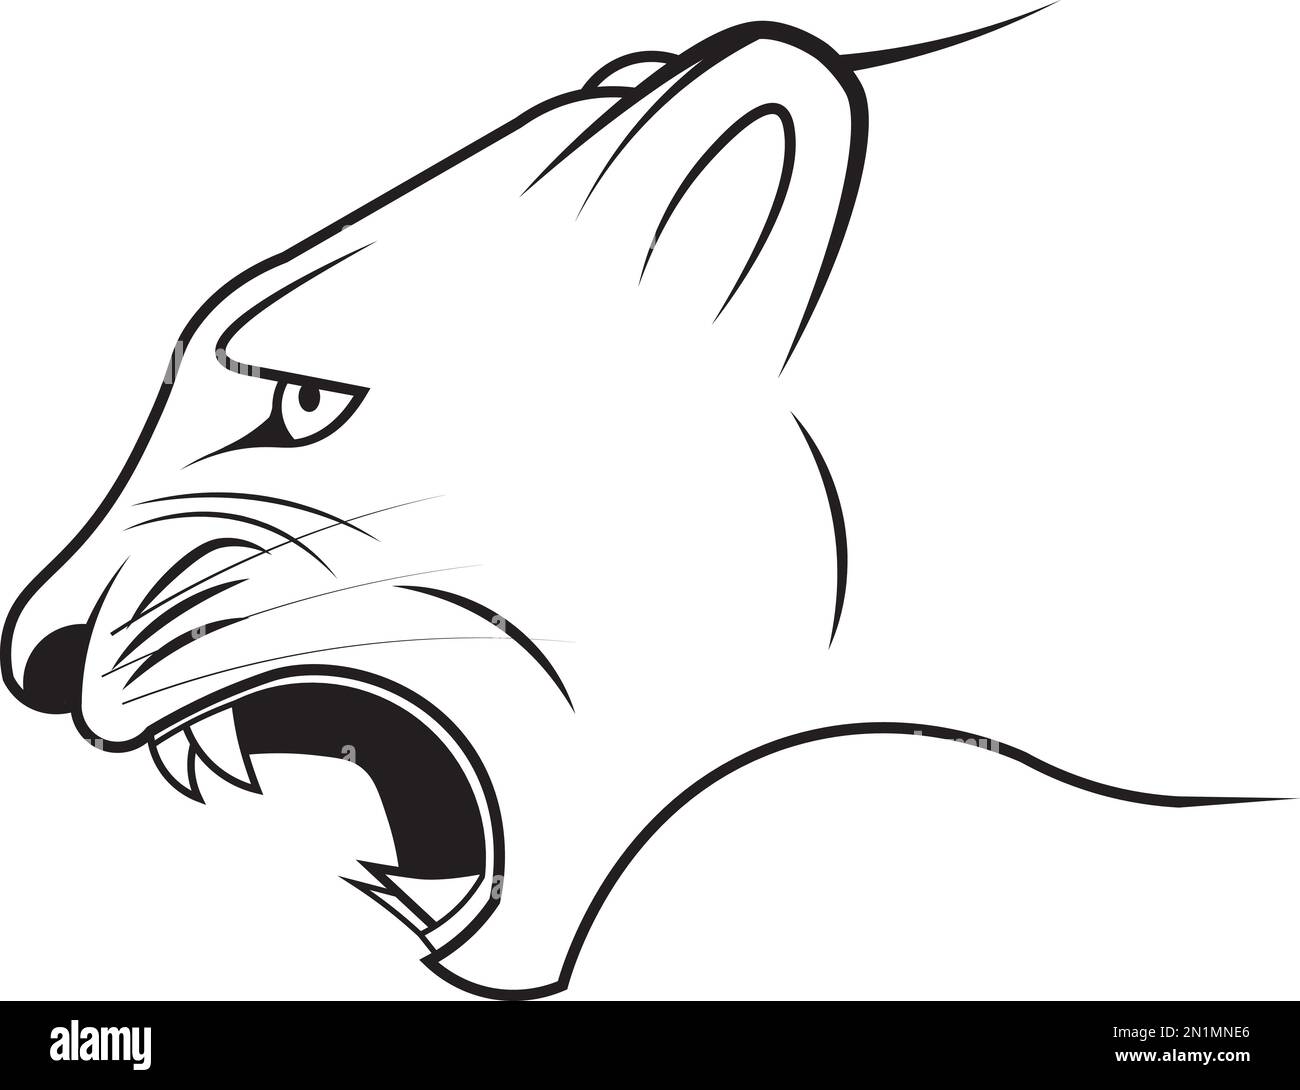 The profile of the head of an enraged puma ready to attack Stock Vector